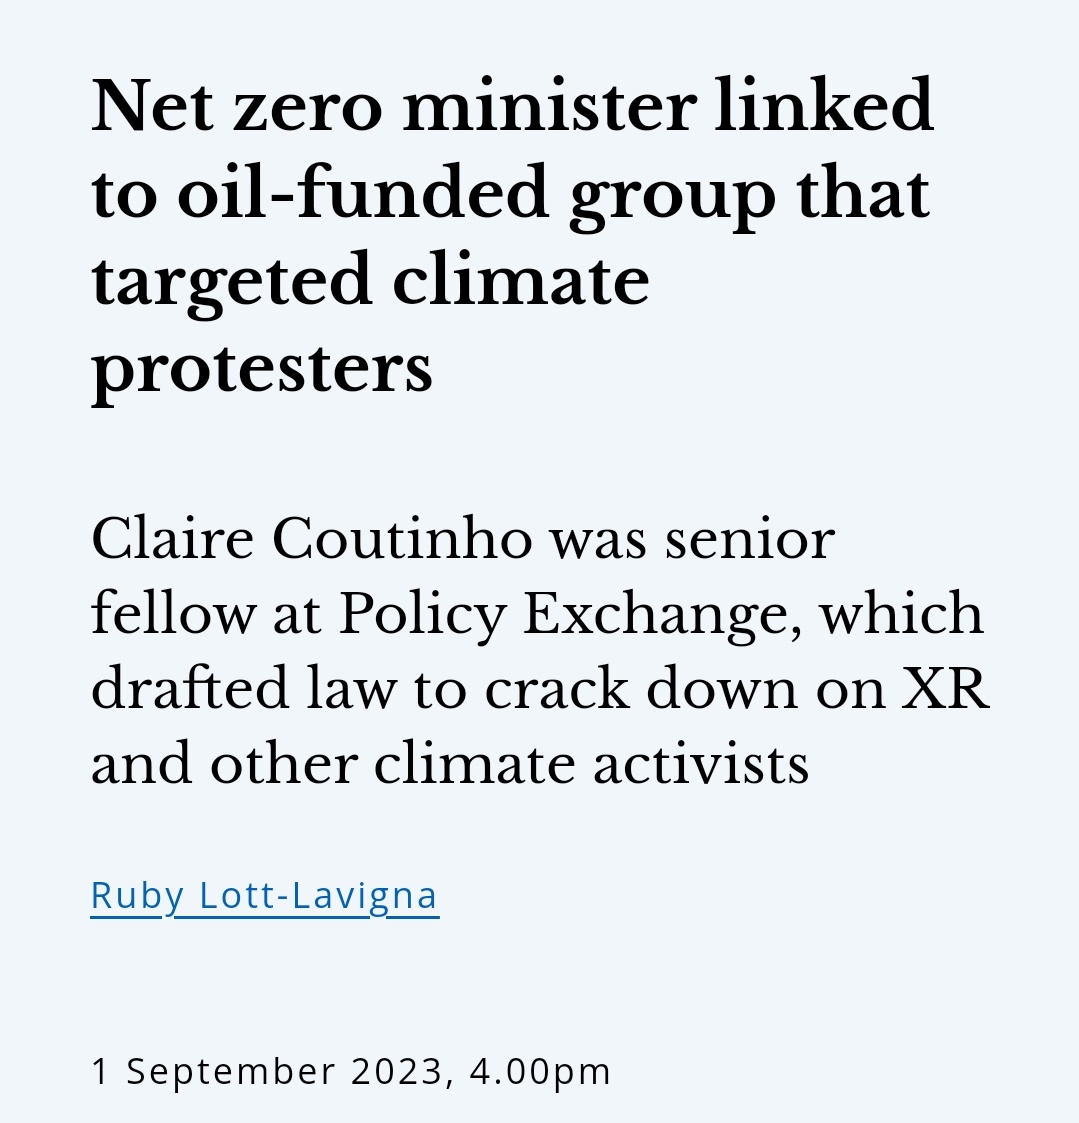 Who better to put in charge of achieving Net Zero than Claire Coutinho, who was senior fellow at the oil-funded think tank that drafted a new law to crack down on climate protestors. #TrevorPhillips #BBCLauraK